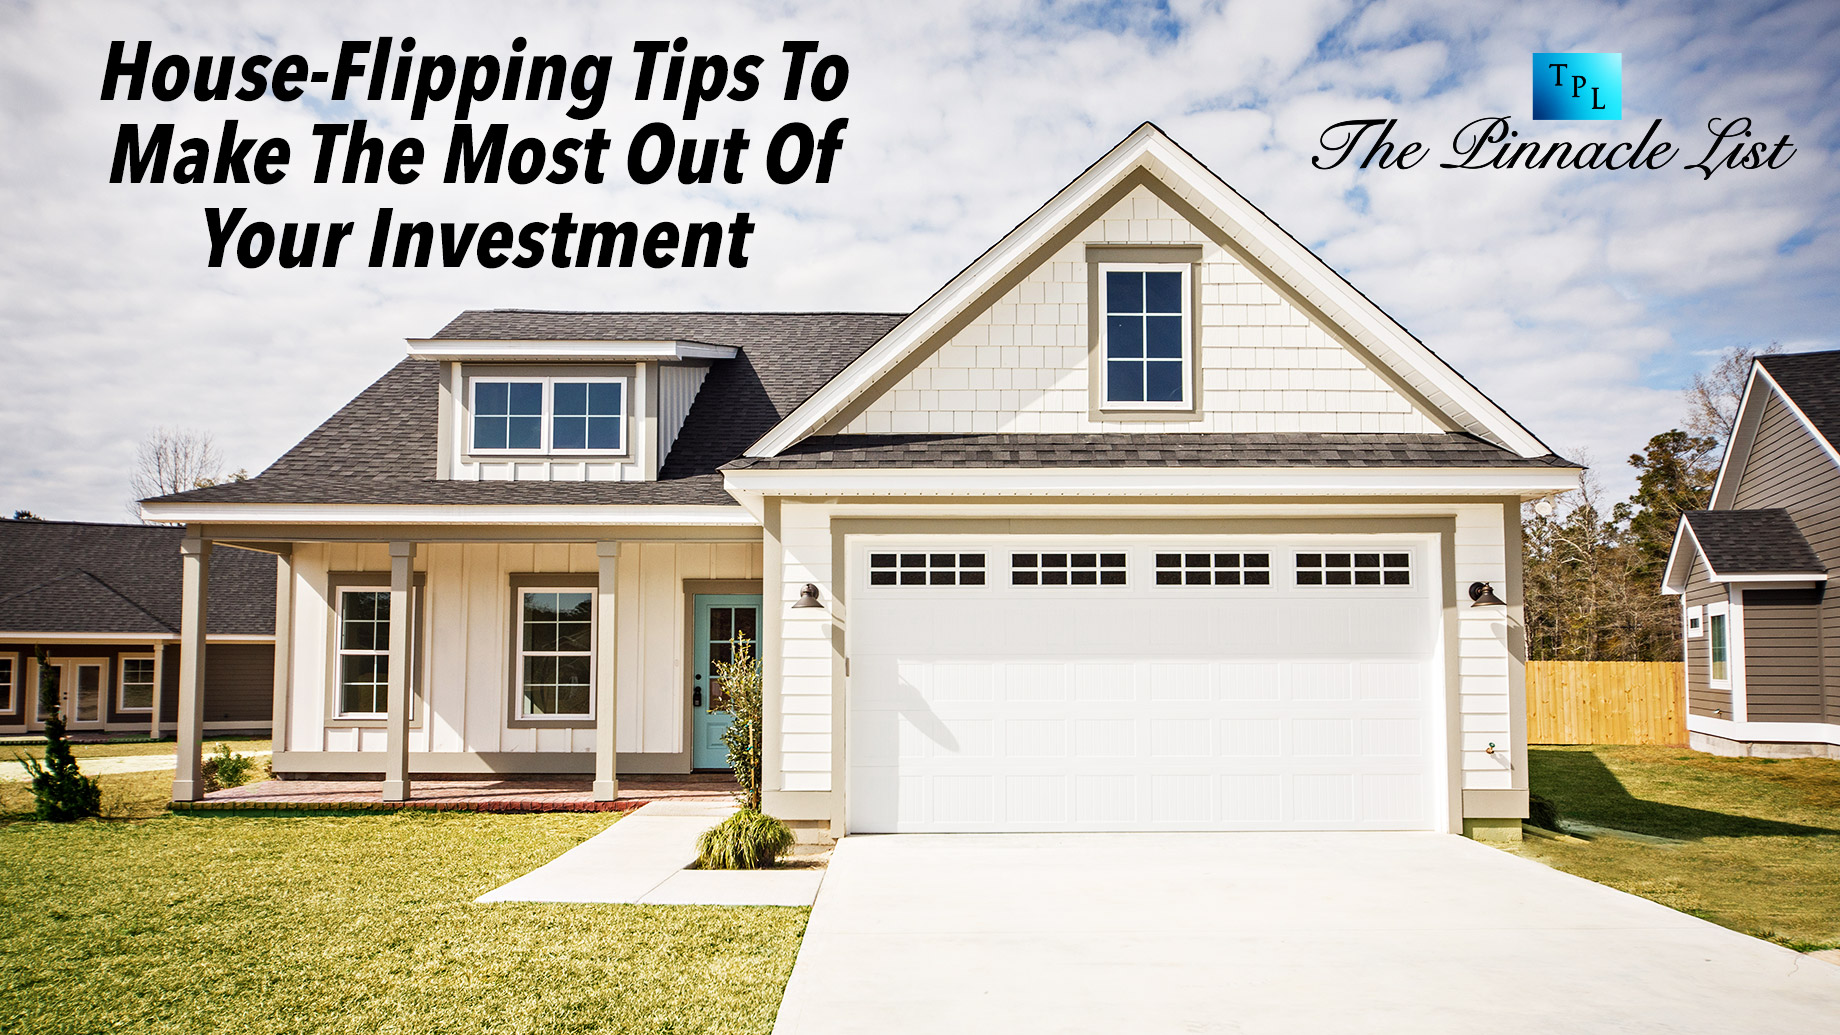 House-Flipping Tips To Make The Most Out Of Your Investment